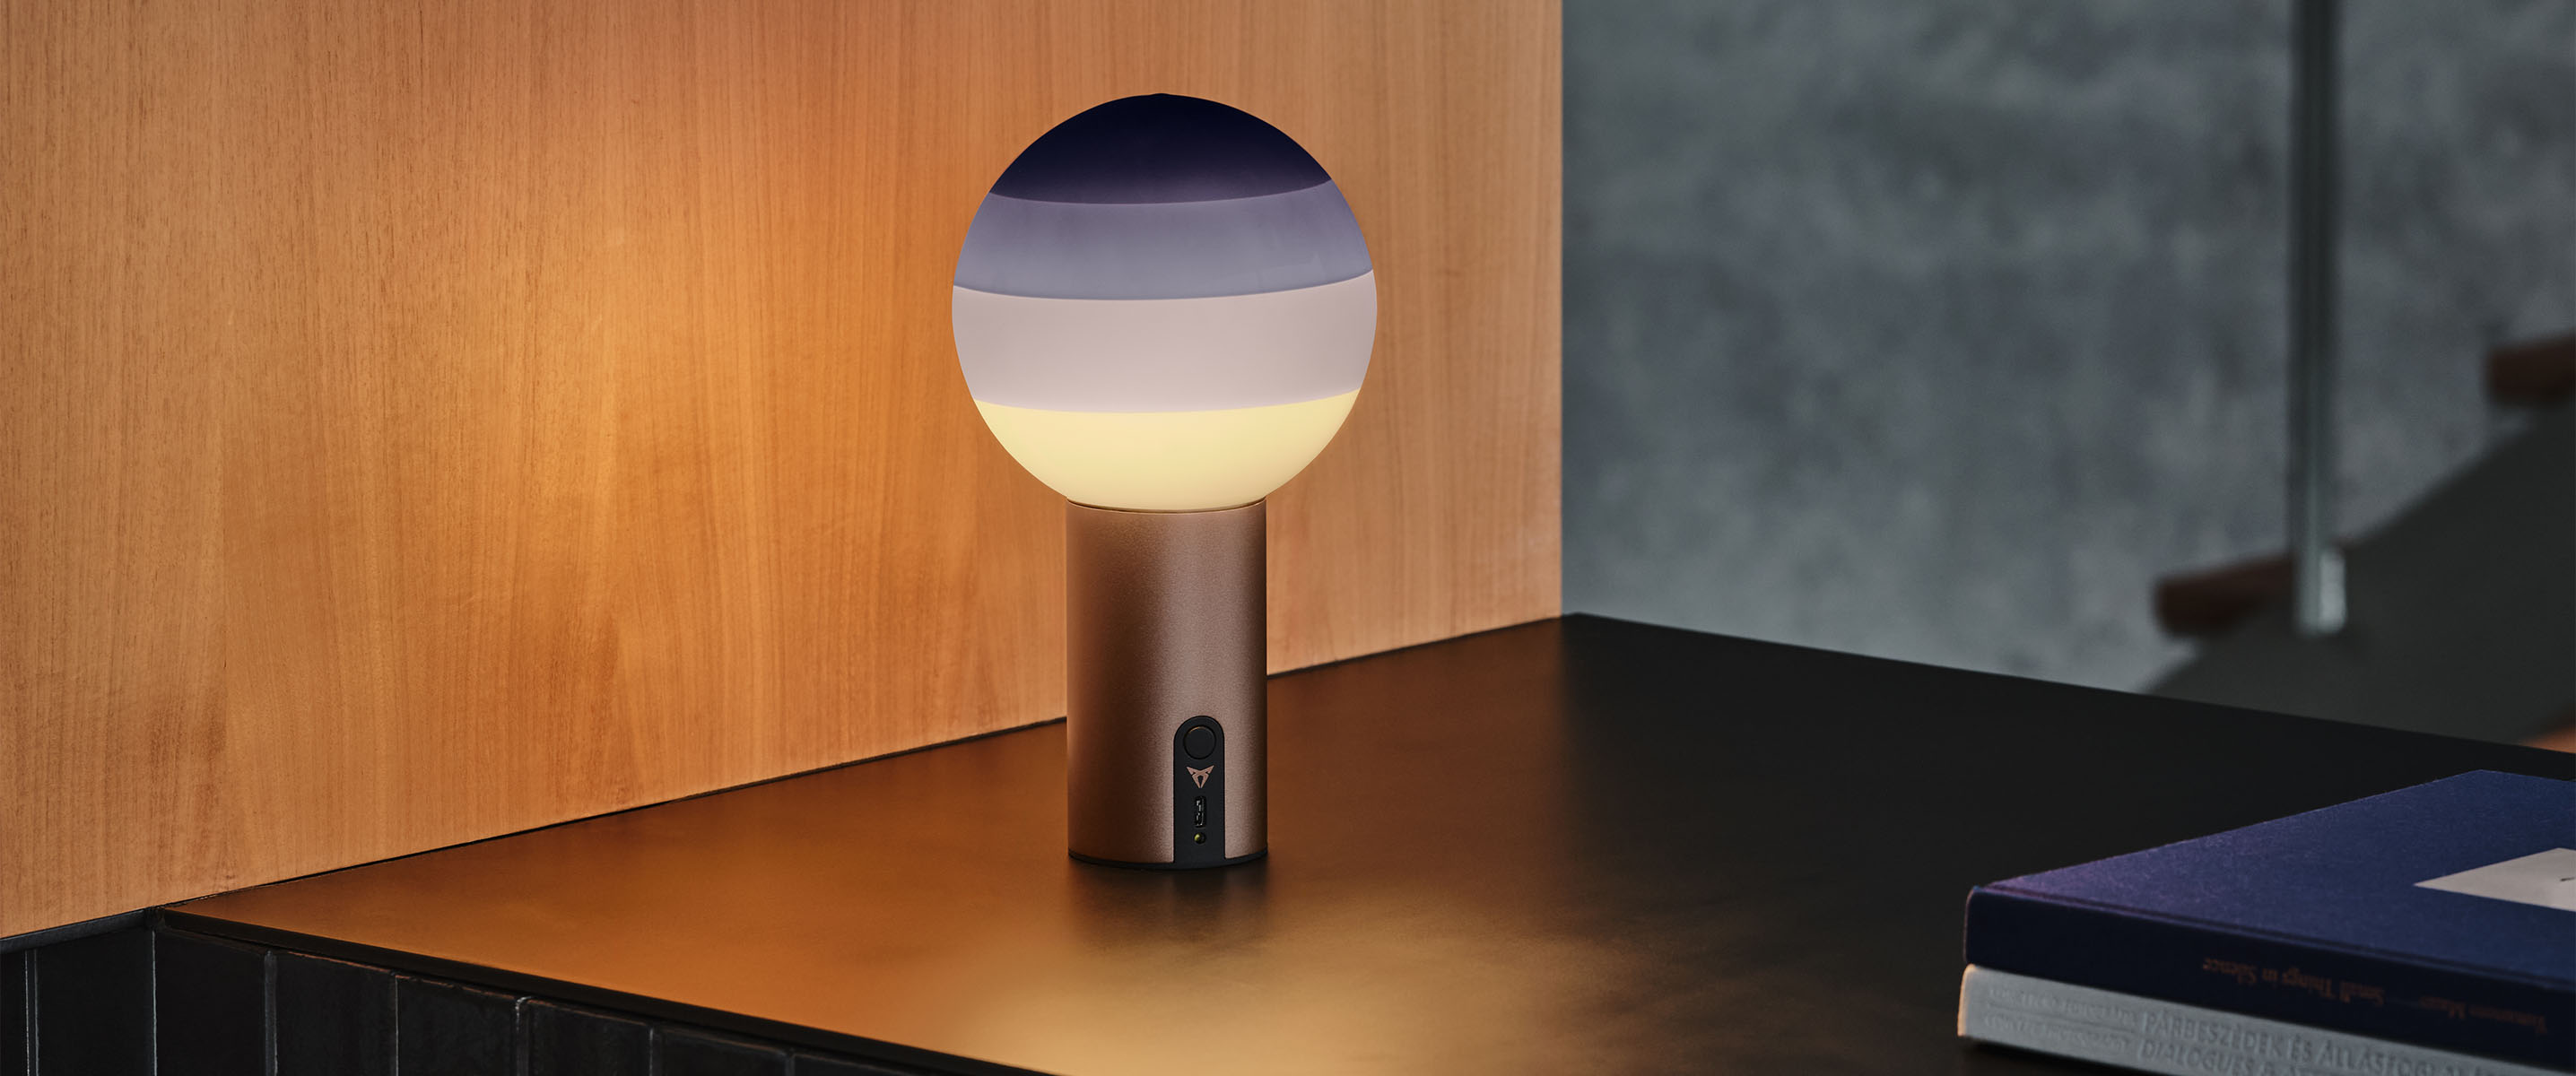 a portable cupra x marset dipping light with a spherical frosted glass top, purple gradient dip, emitting a soft glow and a cylindrical base against a wooden panel. the ambience is chic and contemporary. They feature metallic copper bases.